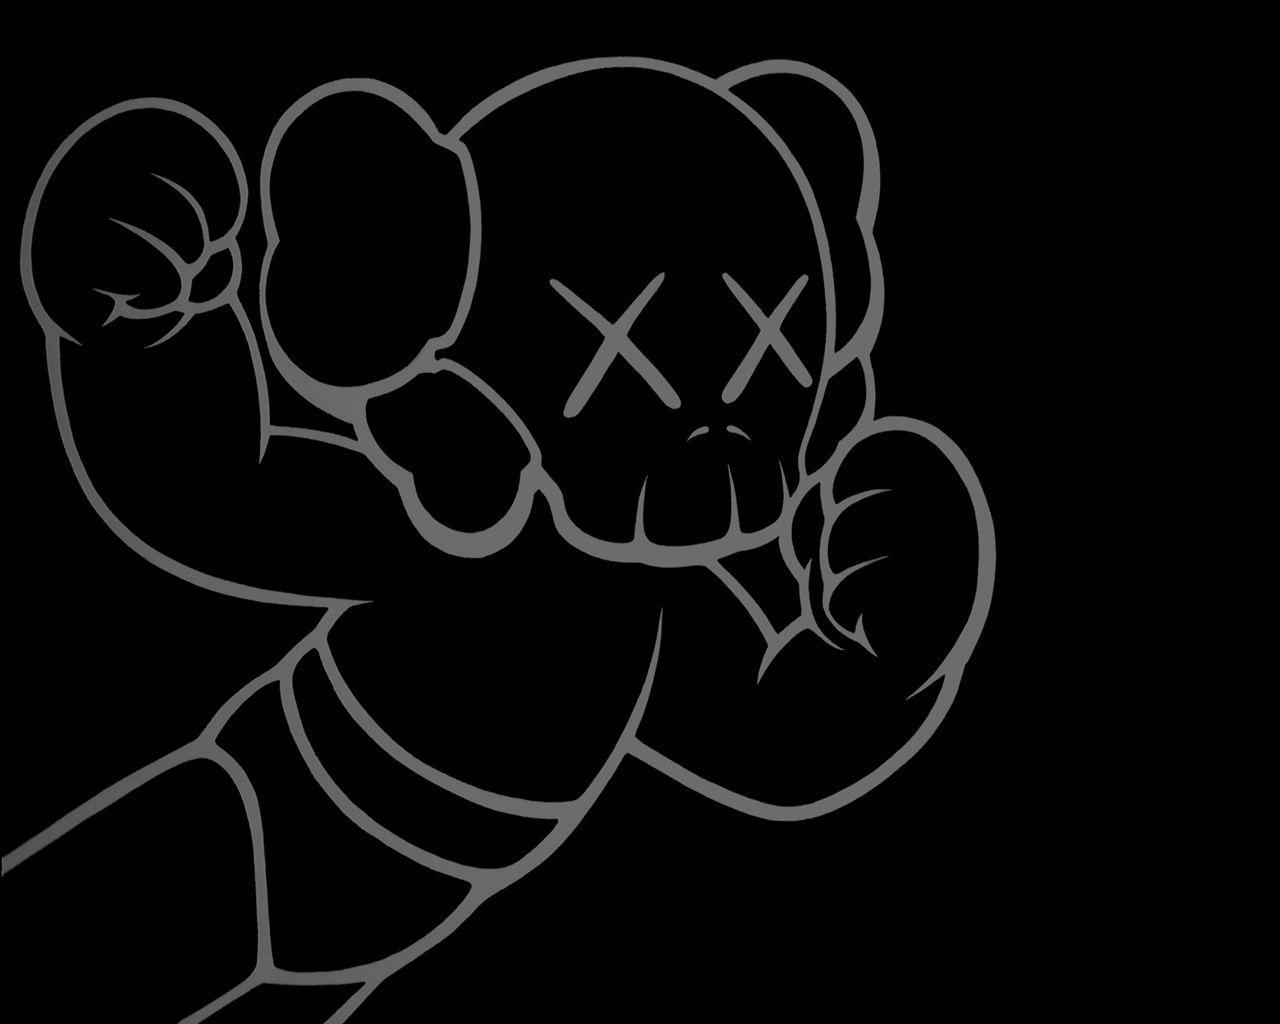 Kaws Companion Wallpapers posted by John Cunningham.